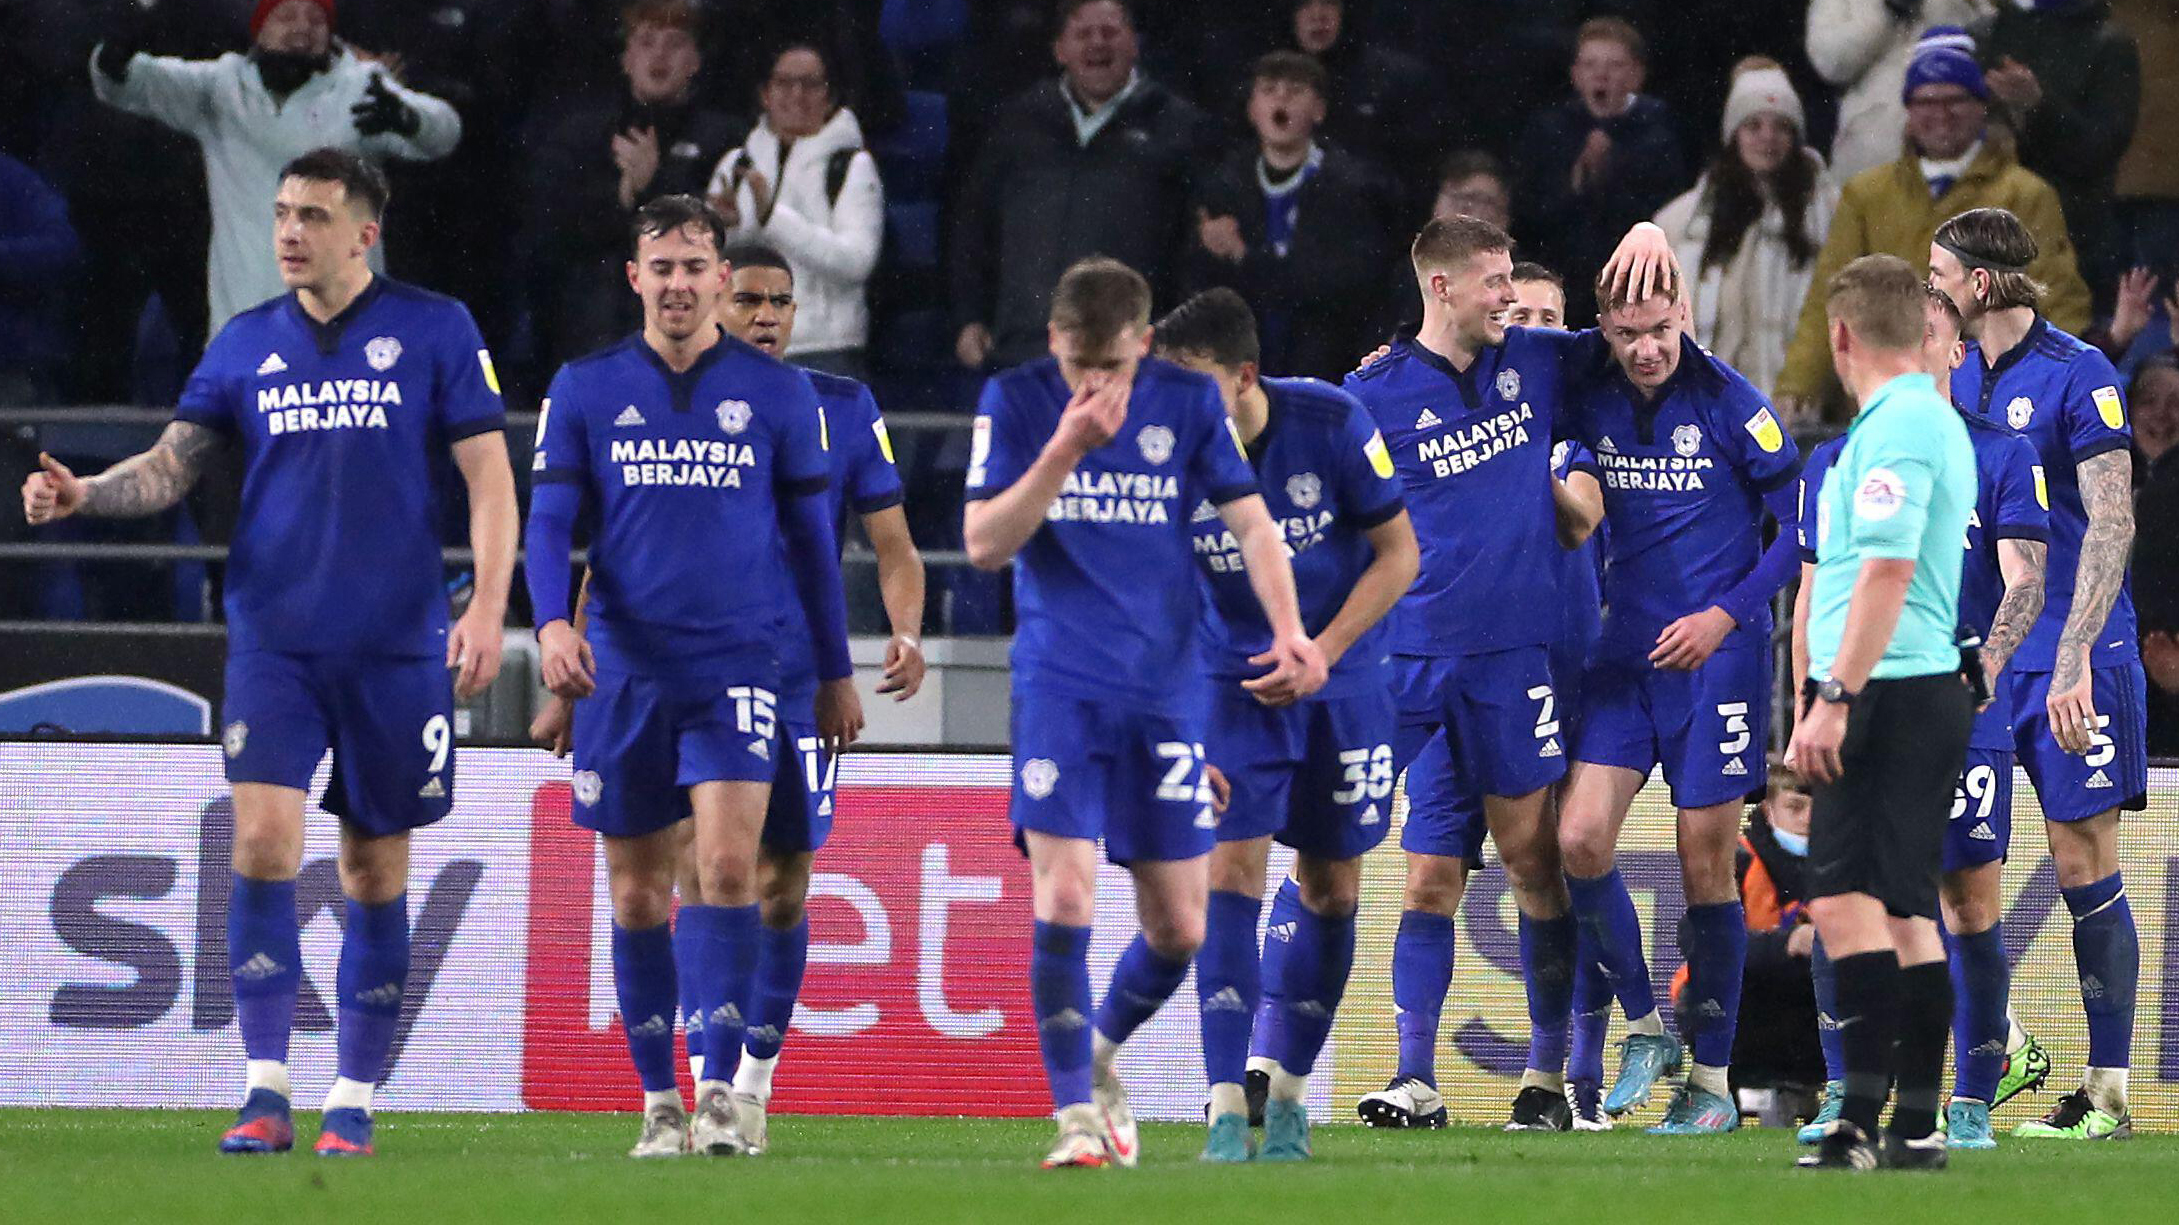 Cardiff City players in a line after celebrating a goal